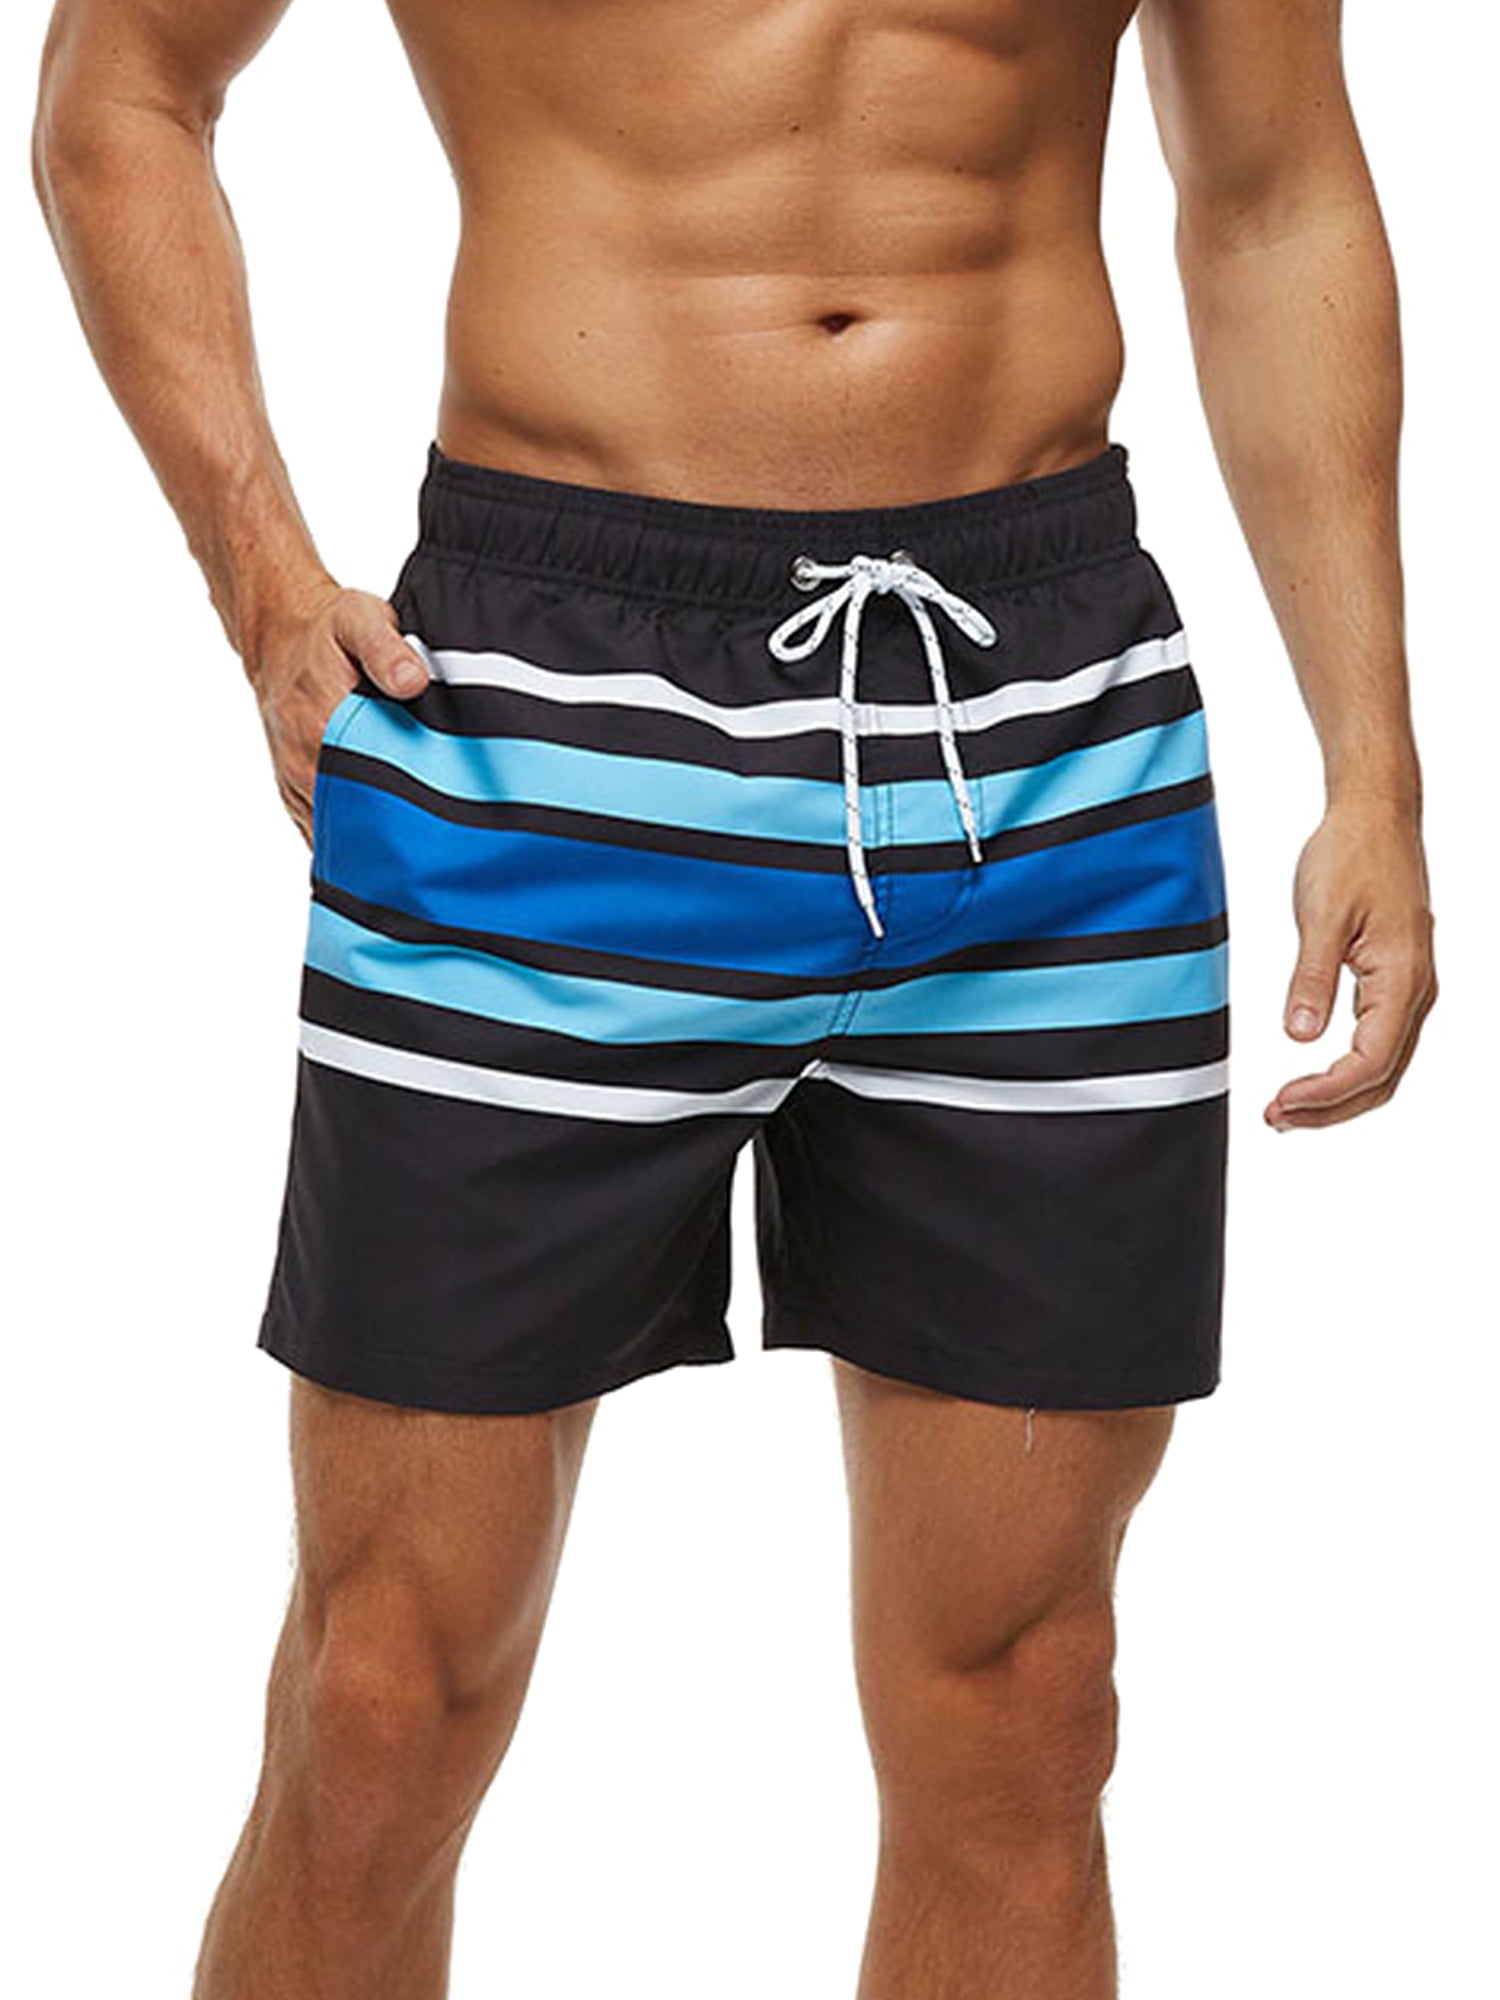 Snow Mountains Mens Beach Shorts Classic Surfing Trunks Surf Board Pants with Pockets for Men 